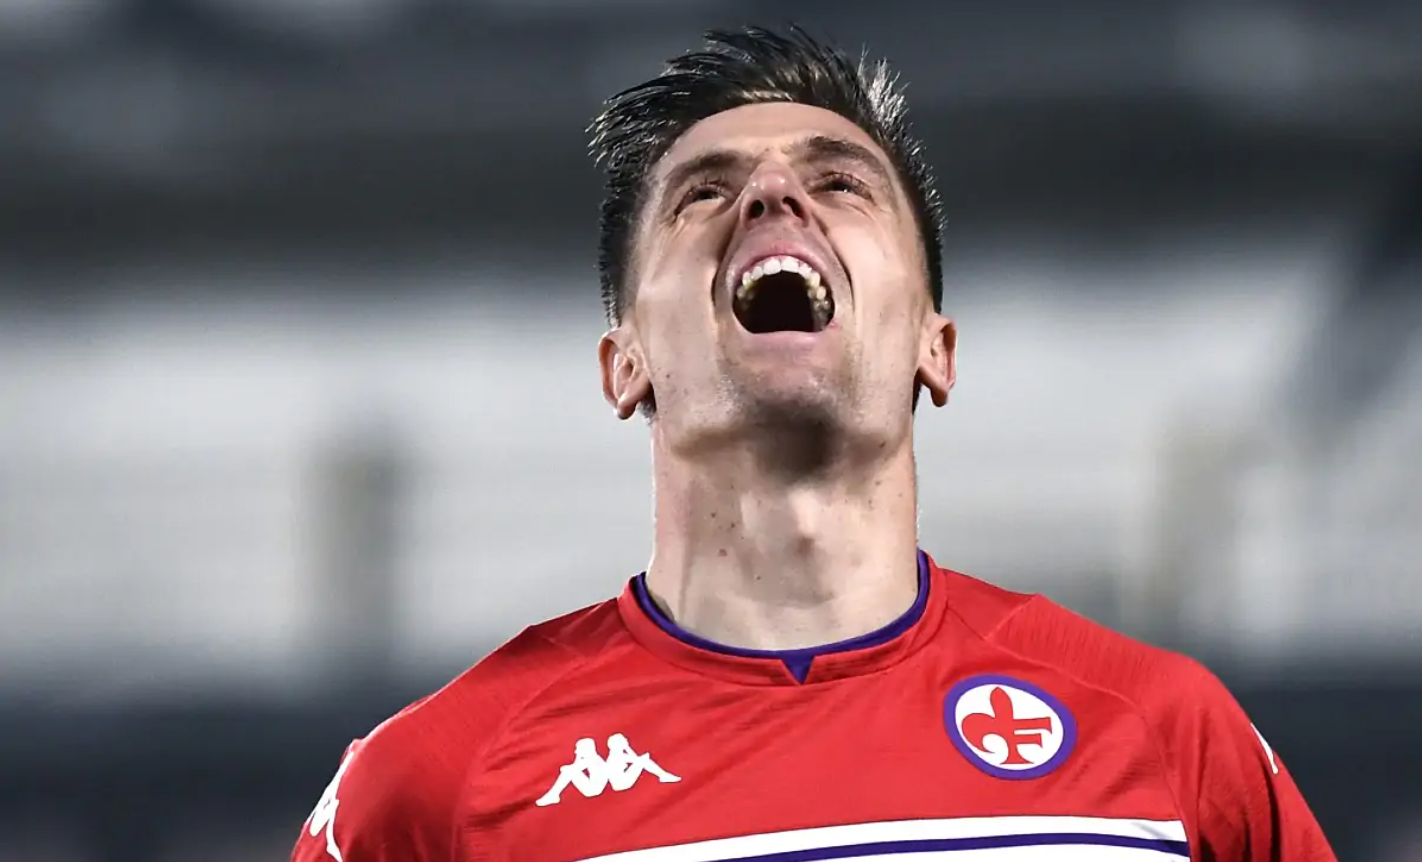 When Genoa signed 22-year-old striker Krzysztof Piatek for €4 million in 2018 they probably didn’t anticipate the impact he would make